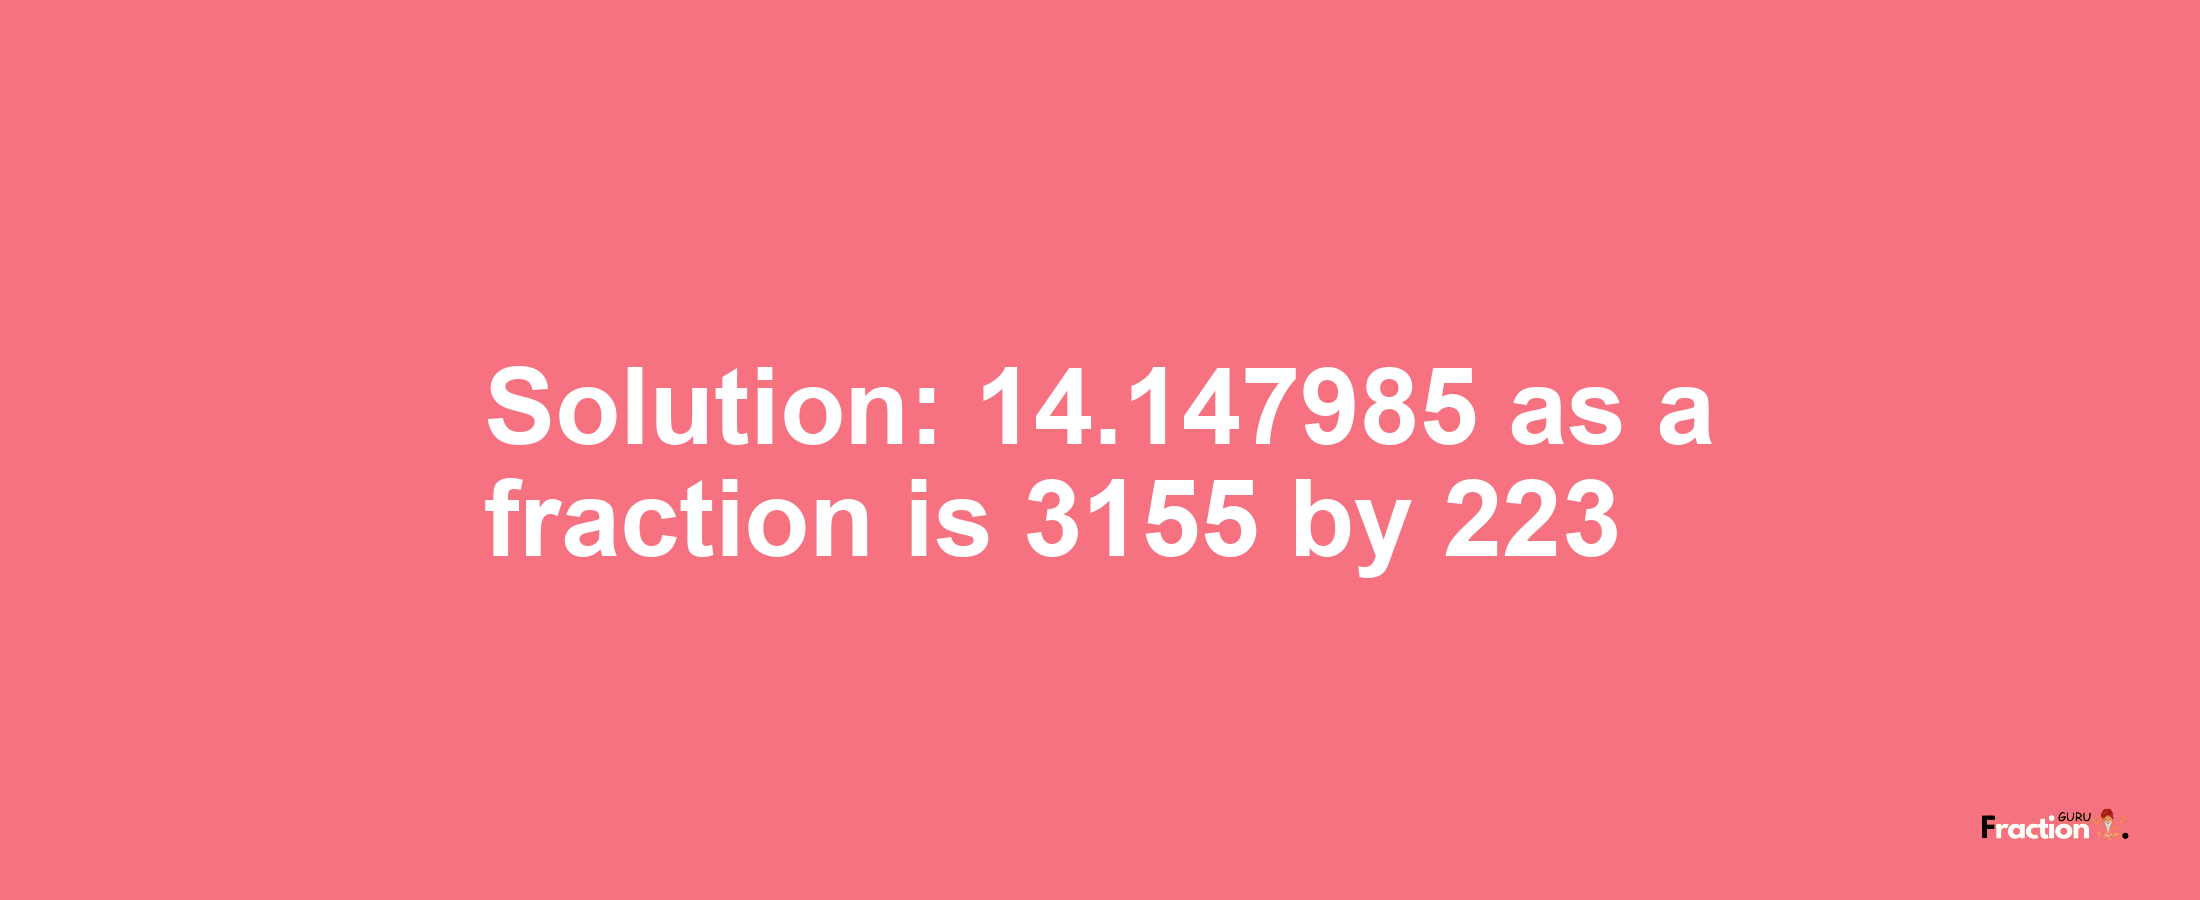 Solution:14.147985 as a fraction is 3155/223